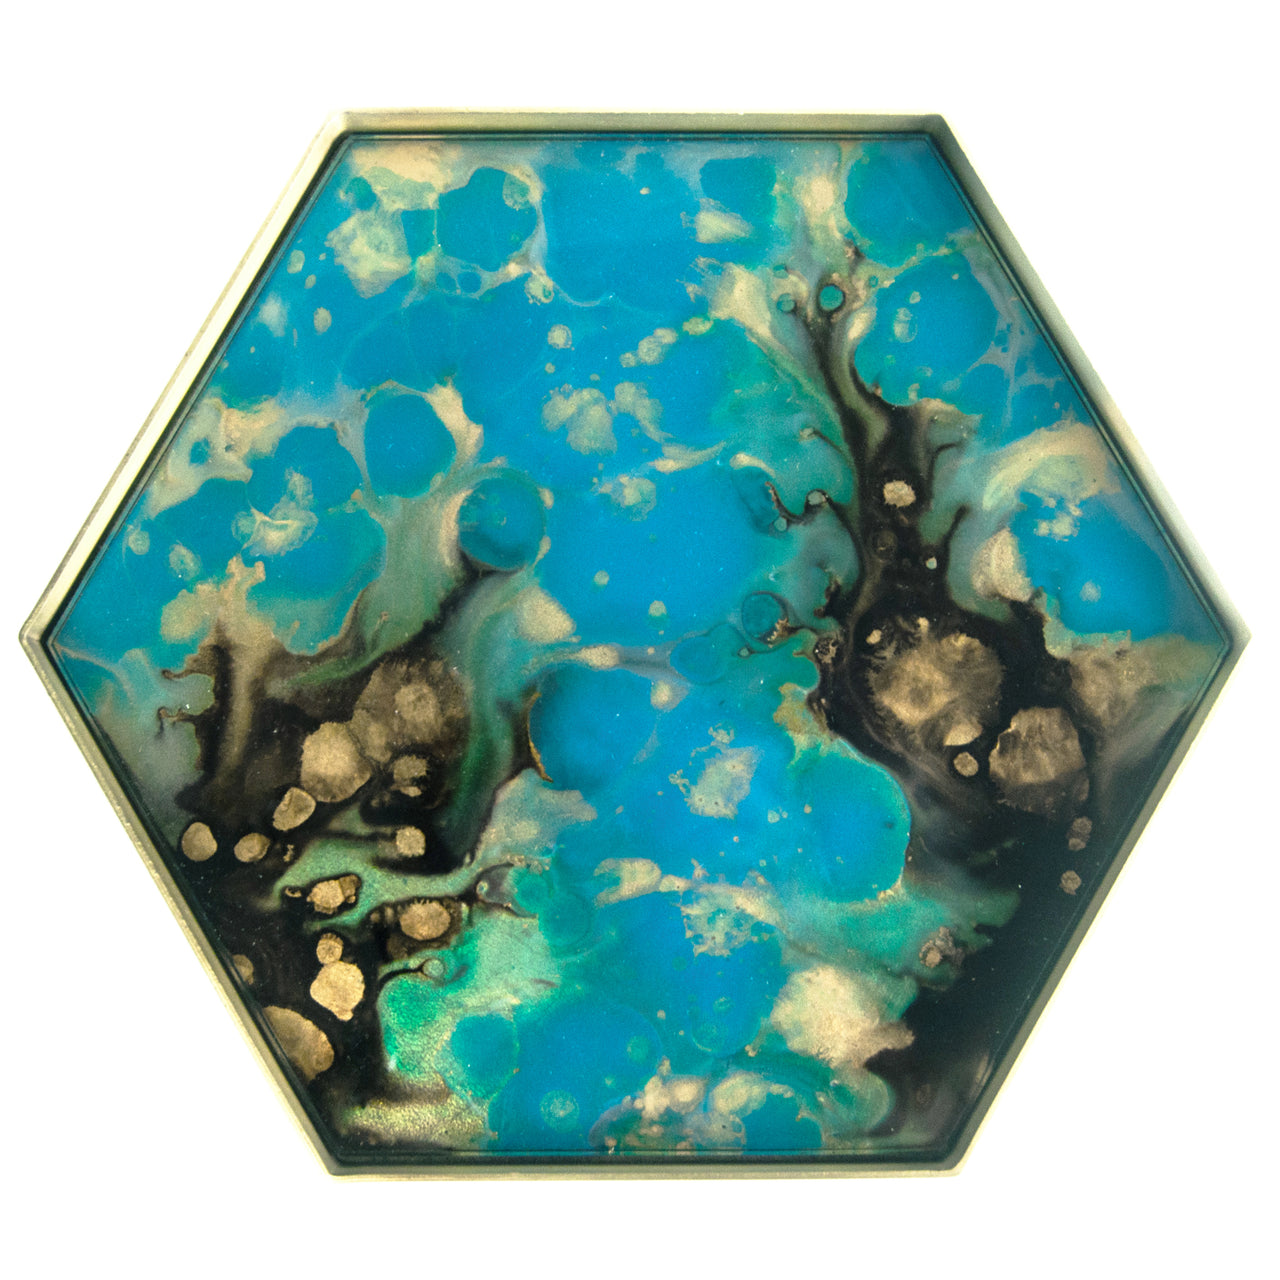 Notre Mode Blue & Gold Hexagon Reverse Painted Glass Tray | The Hour Shop